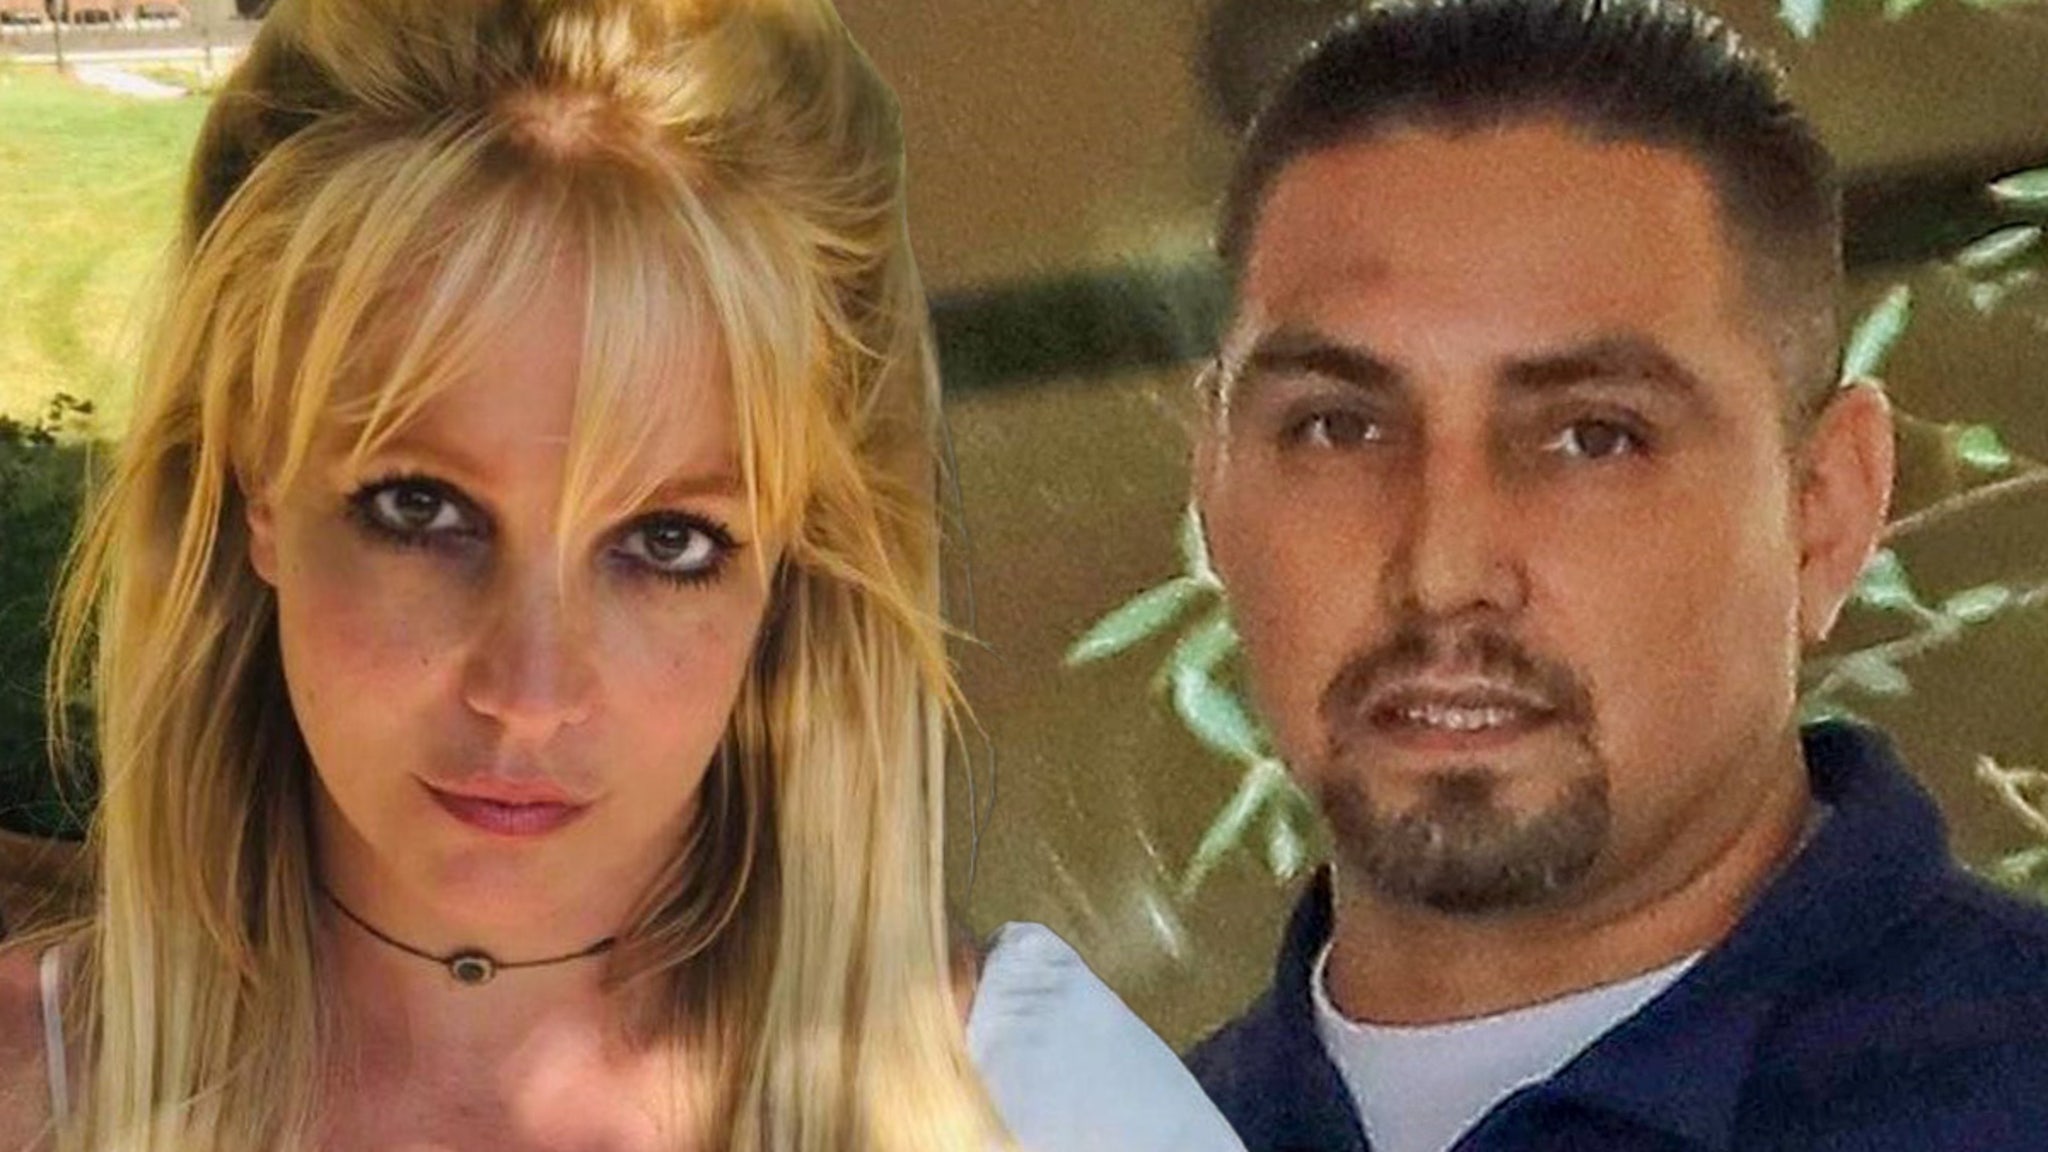 Britney Spears Felt Ex Paul Soliz Was Using Her, Brother Bryan Moves In